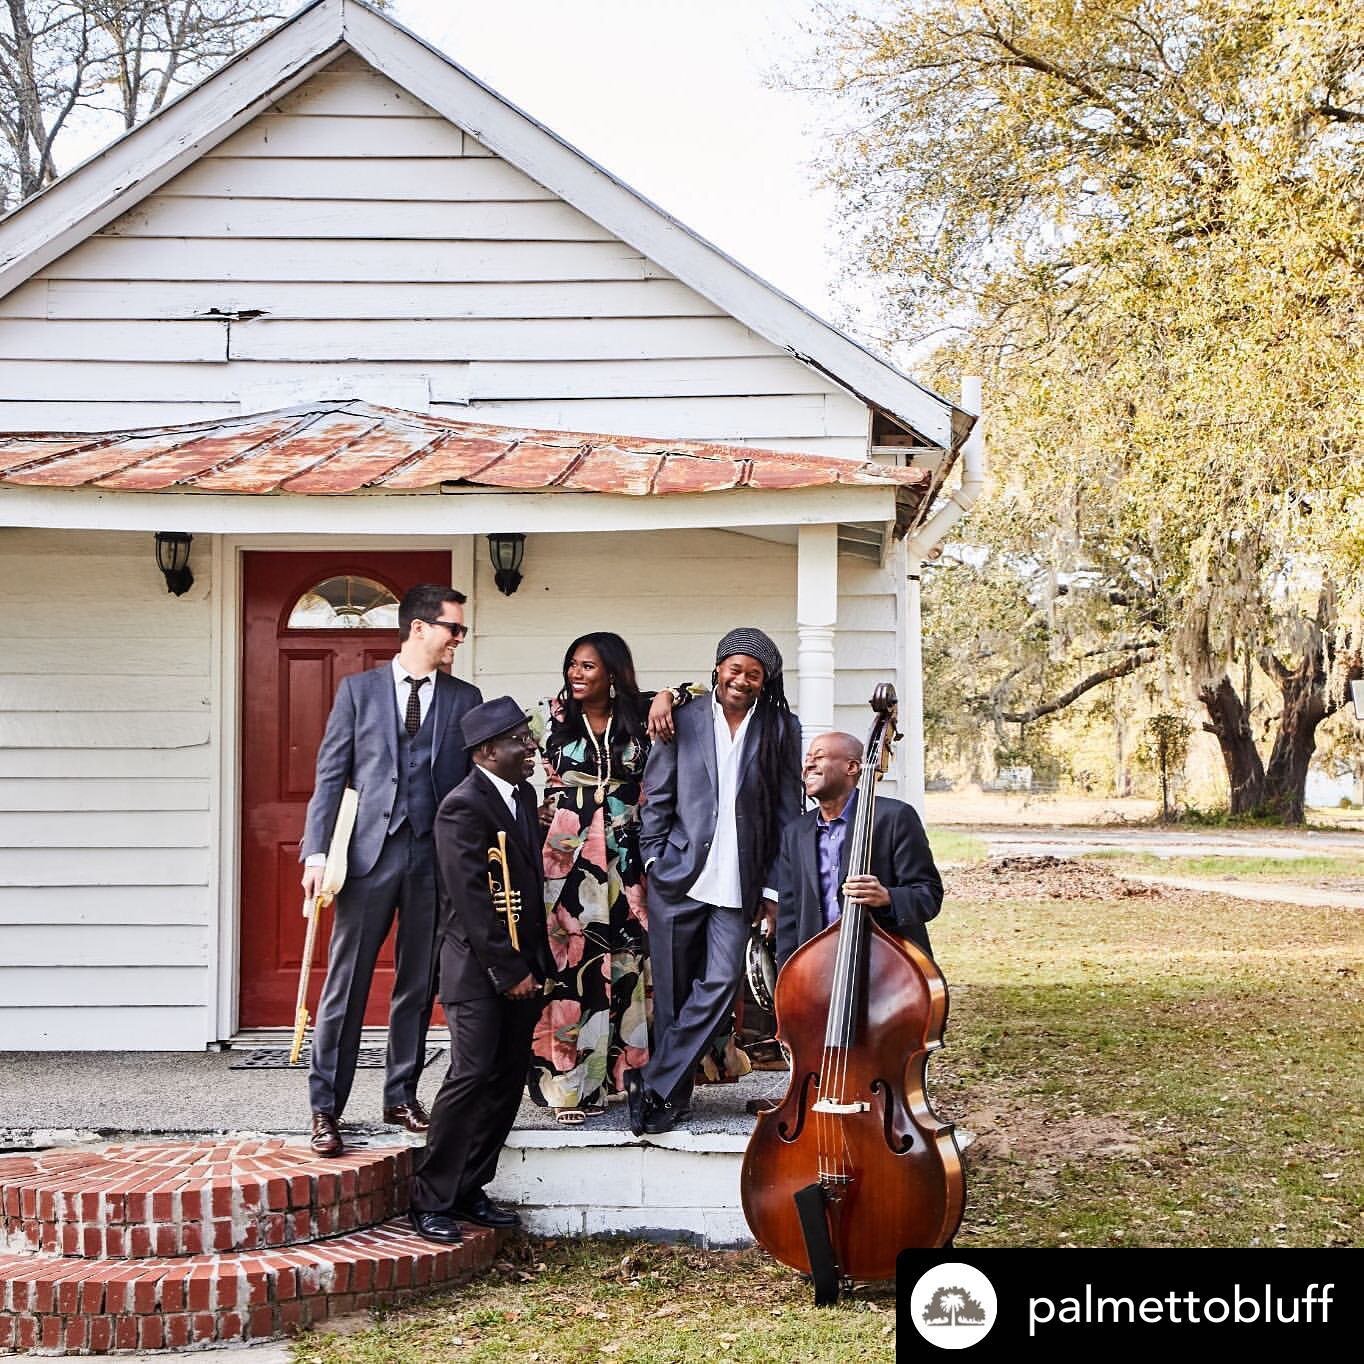 Ranky Tanky&rsquo;s coming to Palmetto Bluff! Repost: @palmettobluff 🎶 @RankyTankyMusic is coming to Palmetto Bluff! The two-time Grammy Award-winning band brings their unique blend of jazz, blues, gospel, and Gullah music to FLOW FEST happening Sat